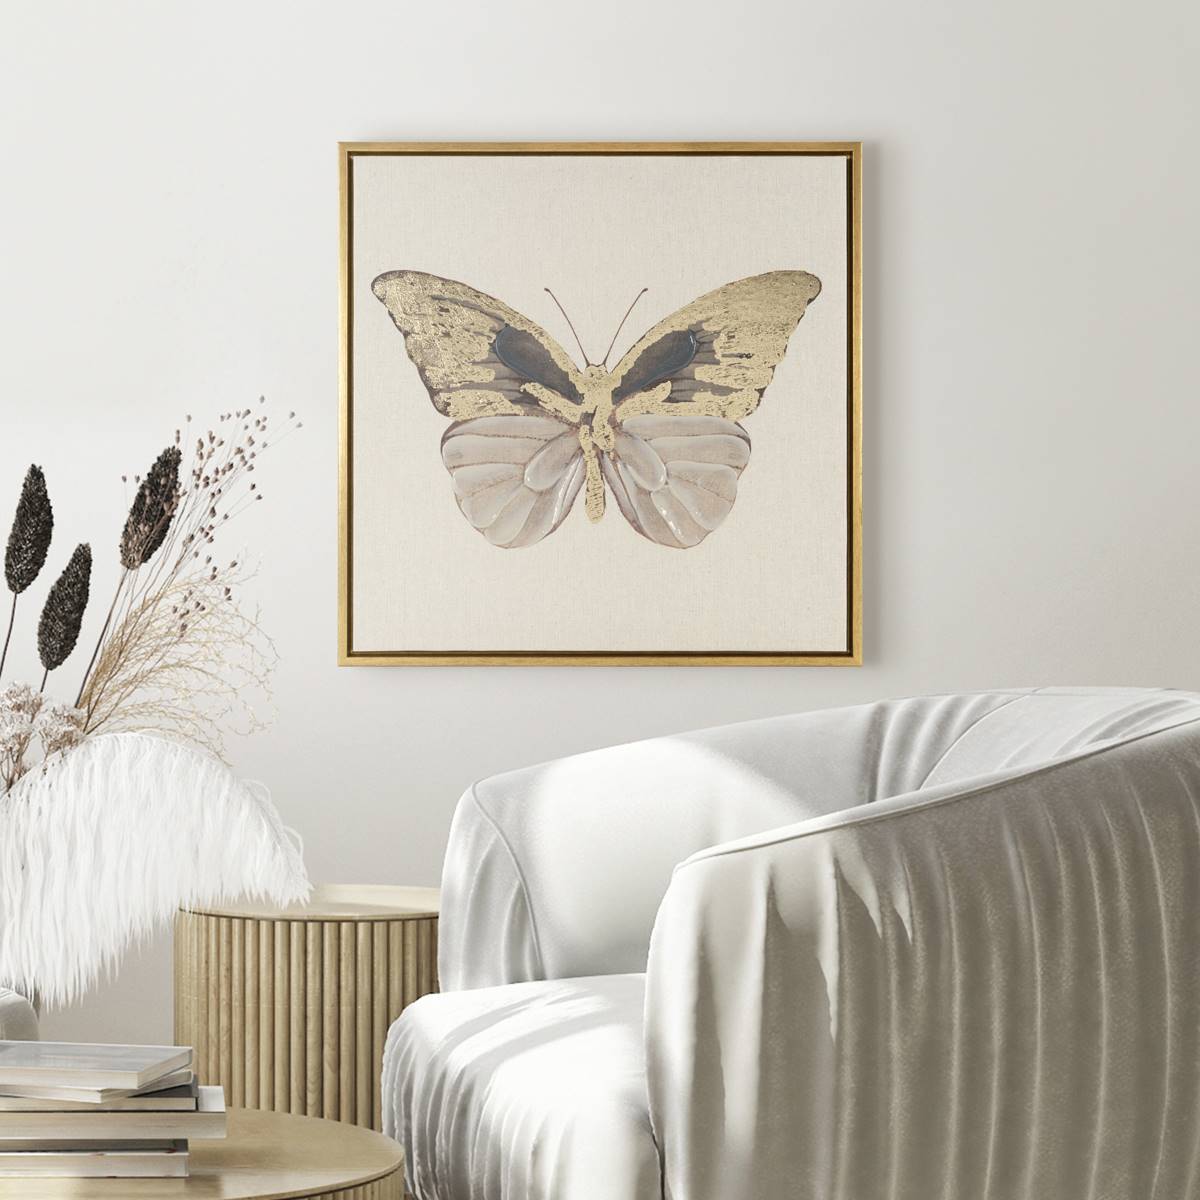 Artisan Home Metallic Brushed Butterfly Canvas Wall Decor